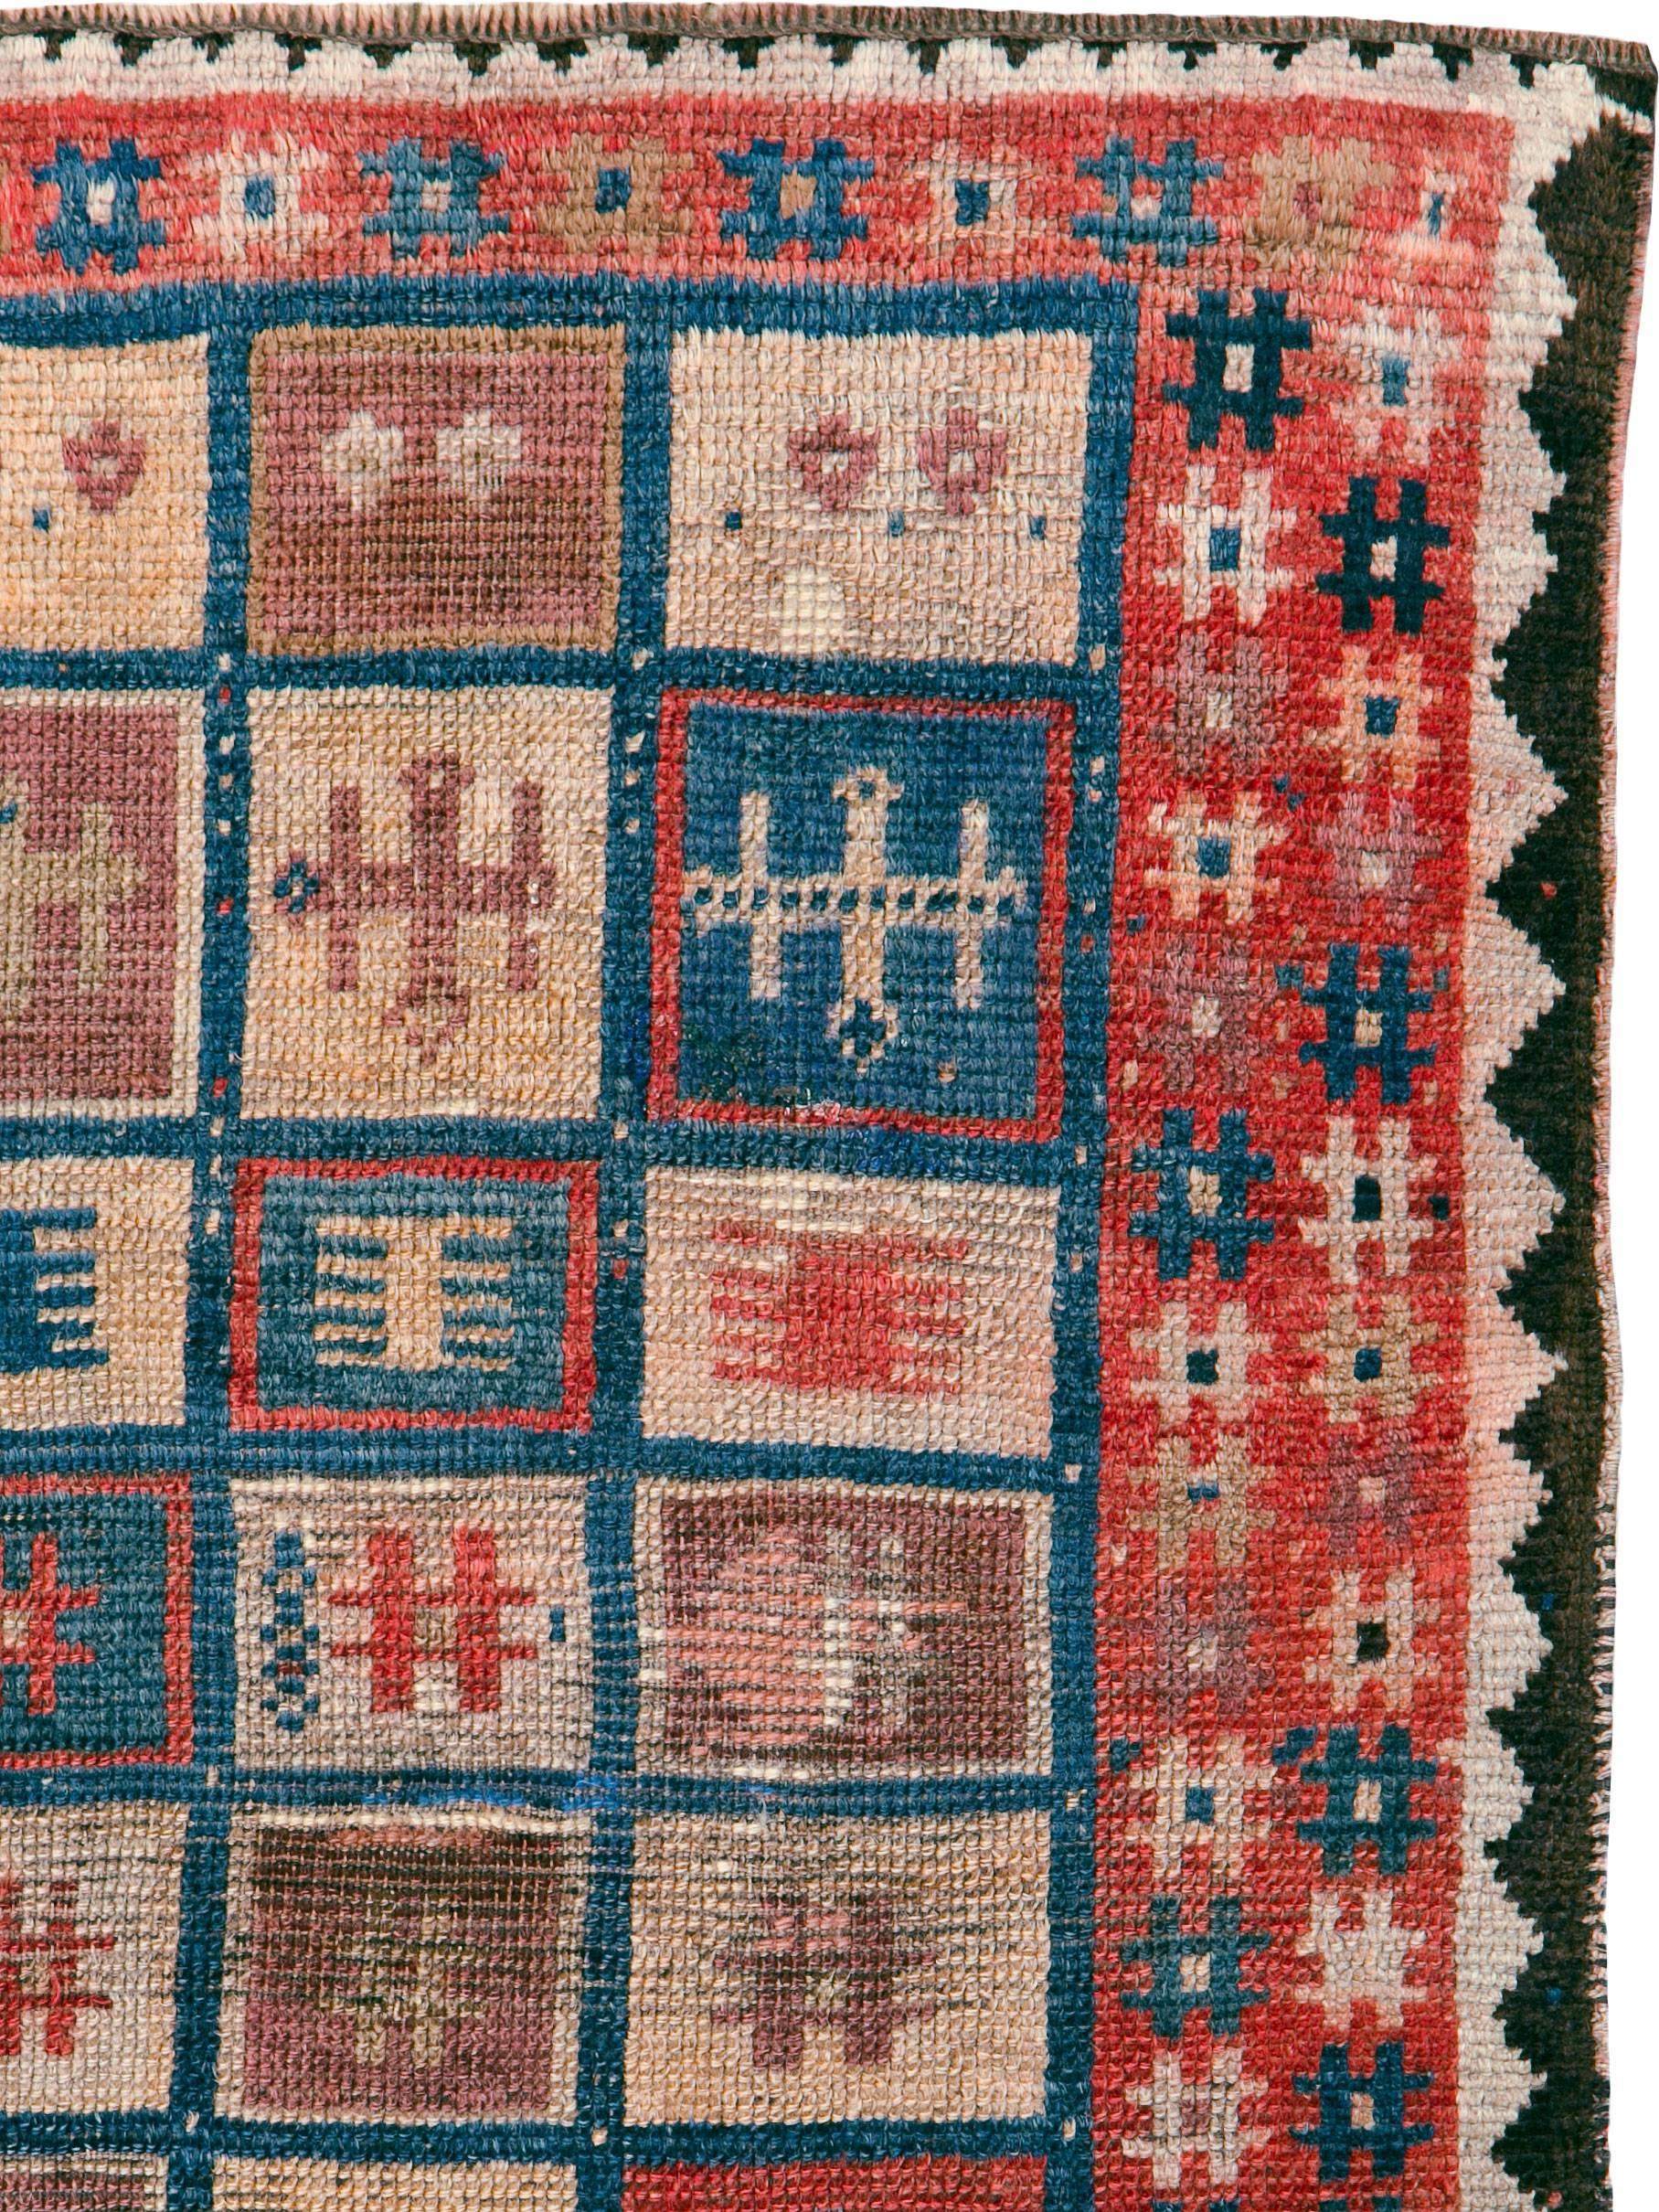 An antique Persian Gabbeh rug from the early 20th century.

Measures: 2' 9